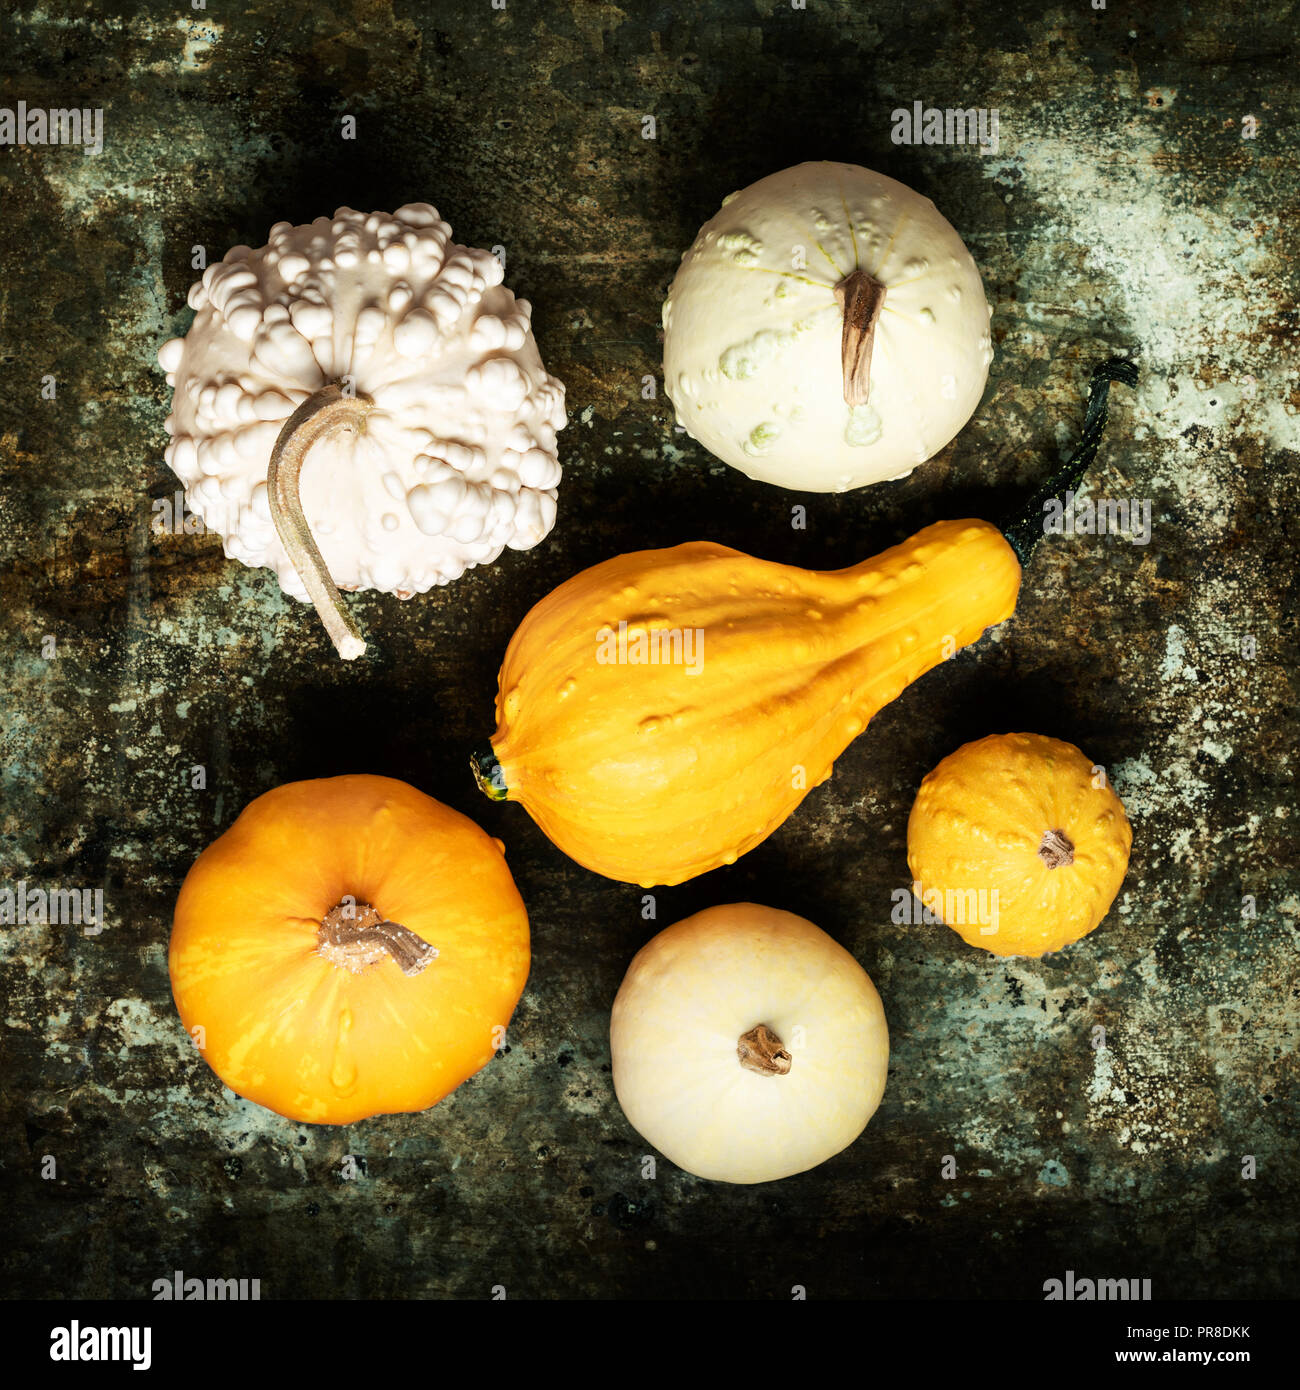 Happy Thanksgiving Background. Selection of various pumpkins on rustic metal background. Autumn vegetables and seasonal decorations concept. Autumn Ha Stock Photo